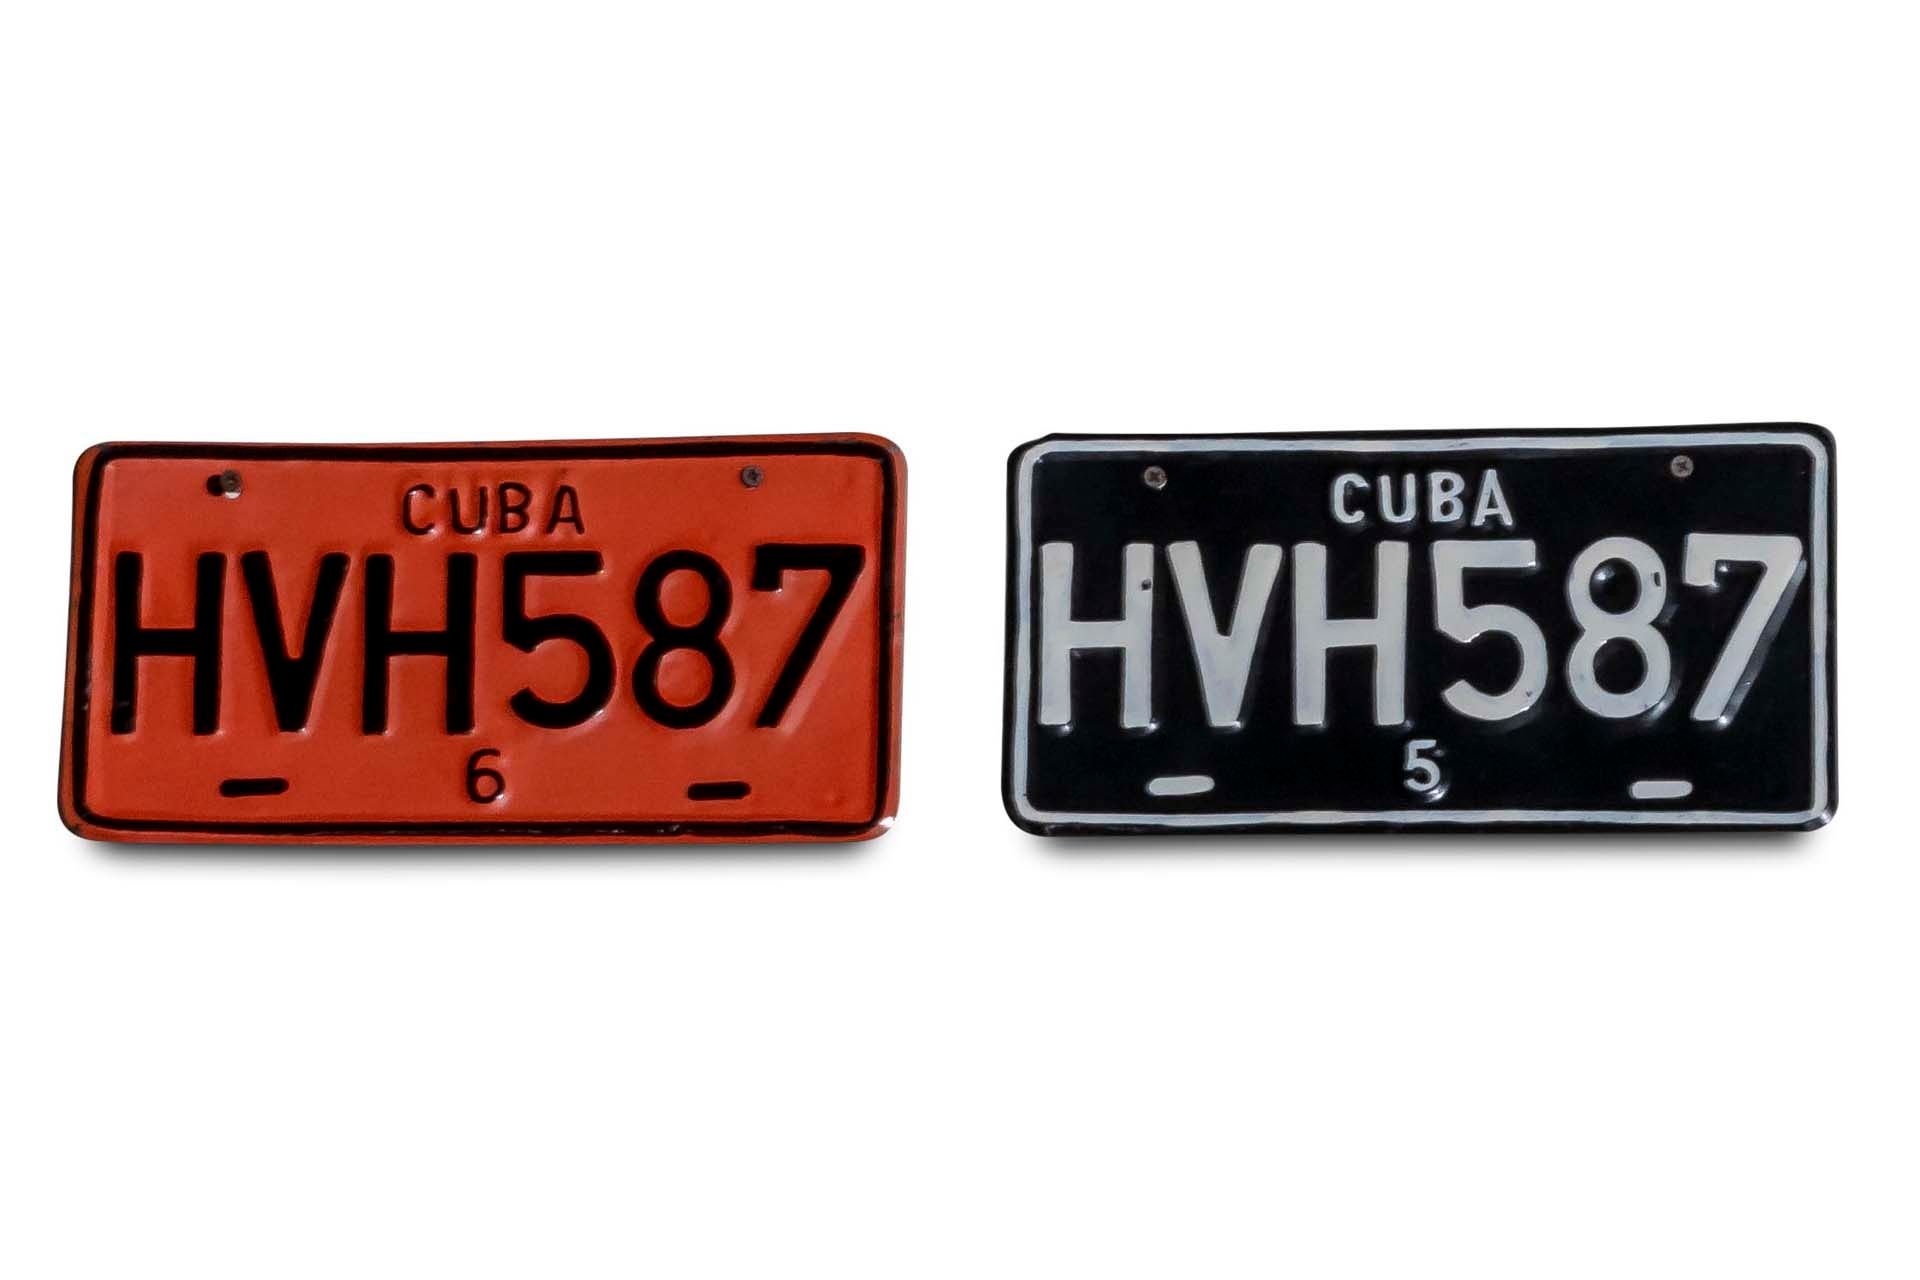 Broad Arrow Auctions | Pair of Matching Cuban License Plates